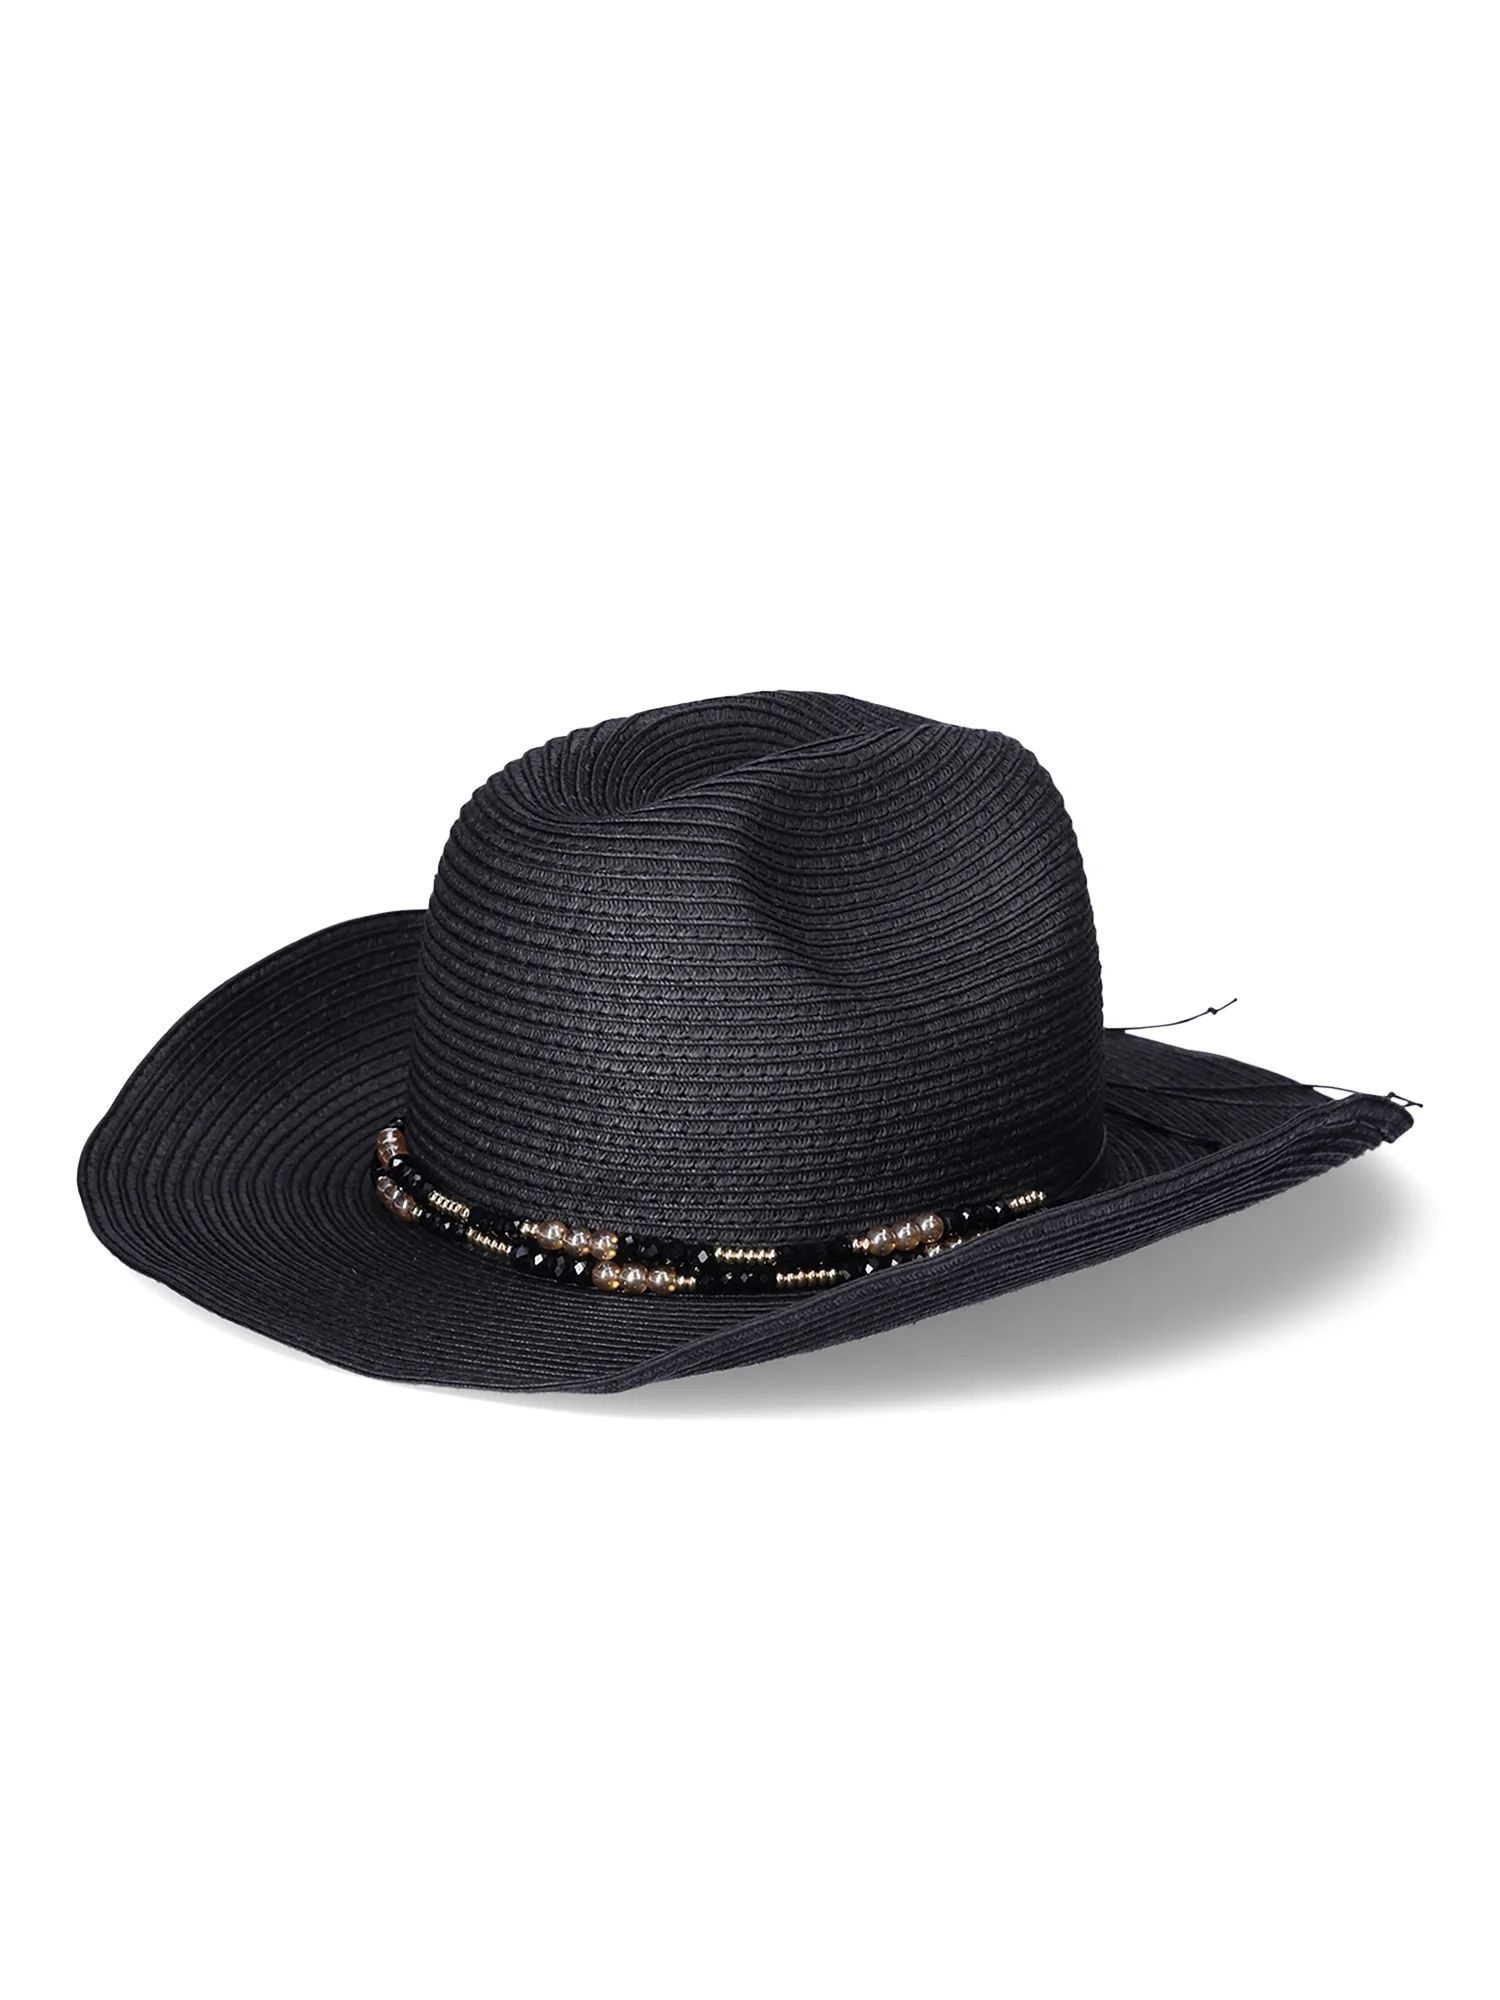 The Pioneer Woman Women’s Straw Cowgirl Hat with Beaded Band | Walmart (US)